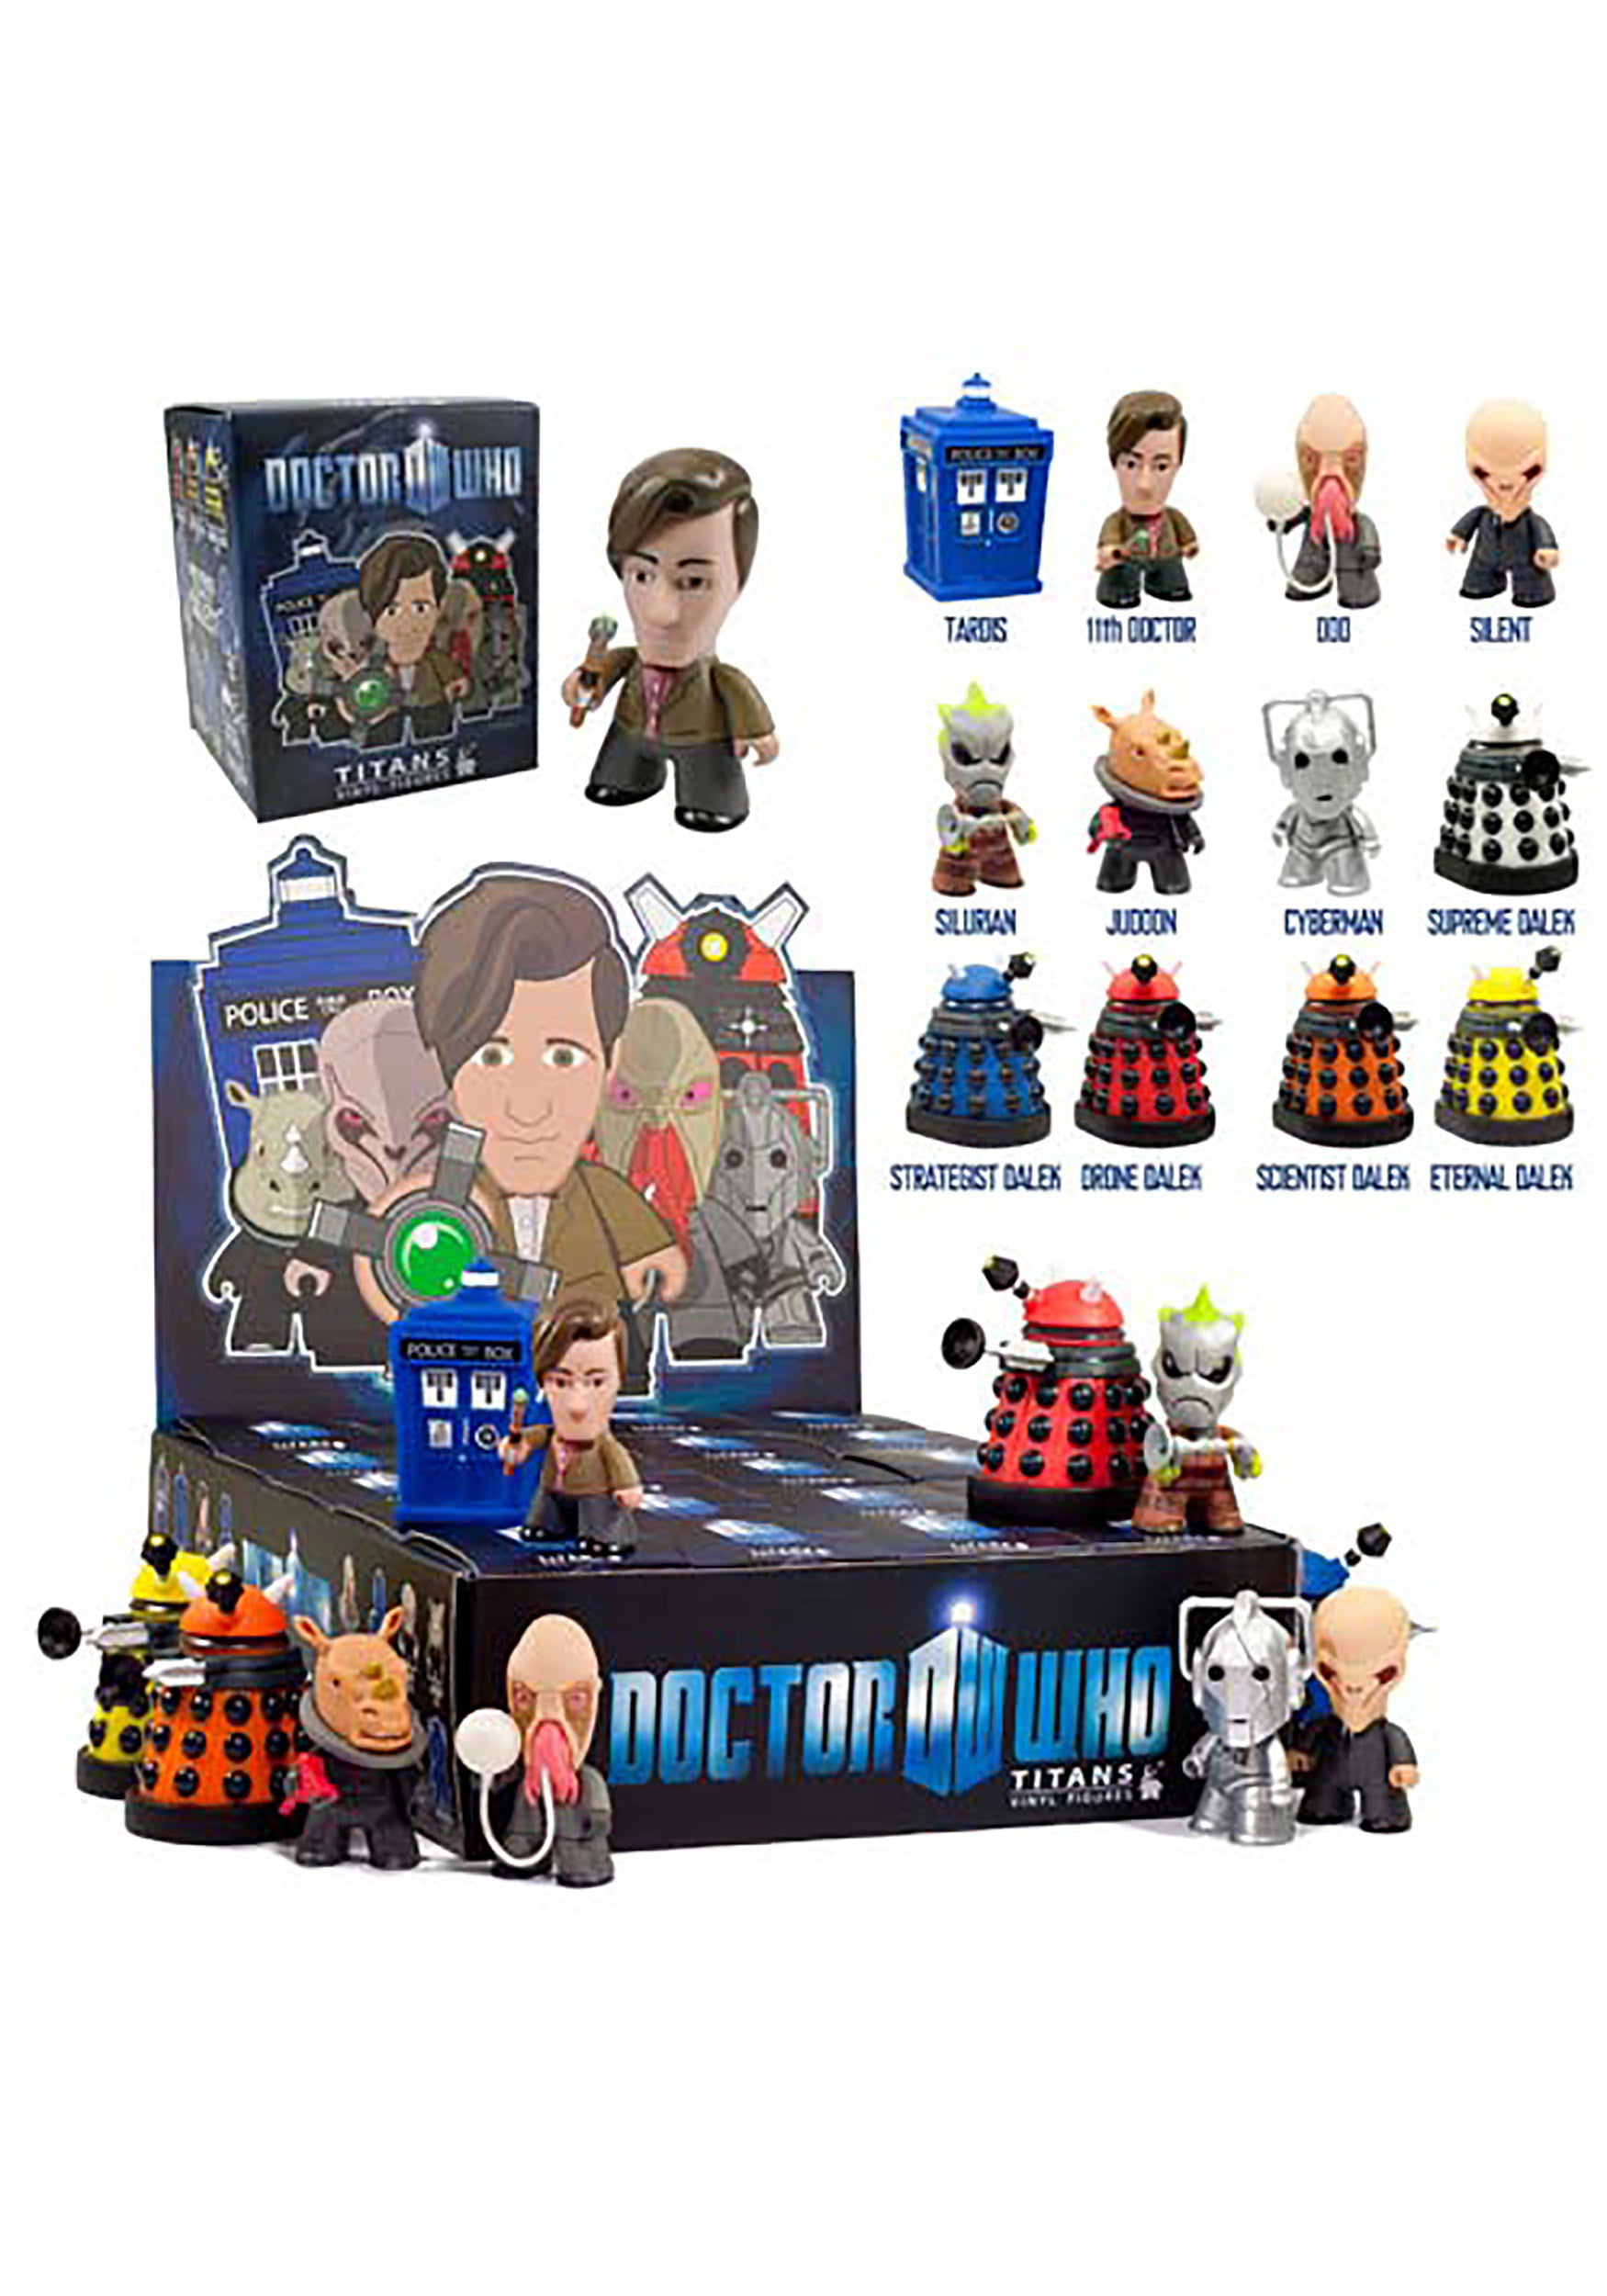 Doctor Who Titans 11th "Good Man" Vinyl Figures 11th Doctor Variant 1/40 